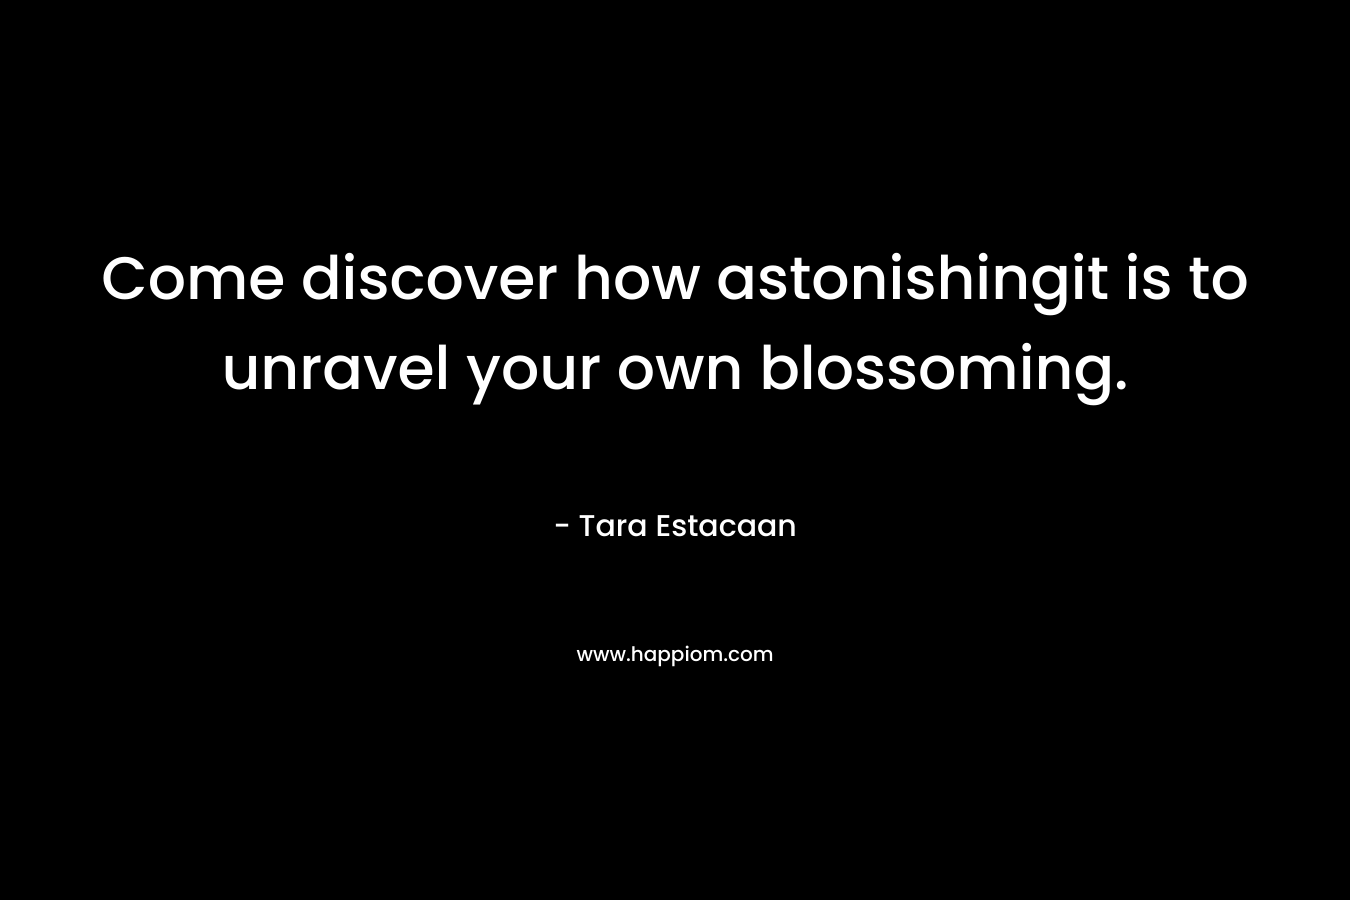 Come discover how astonishingit is to unravel your own blossoming. – Tara Estacaan